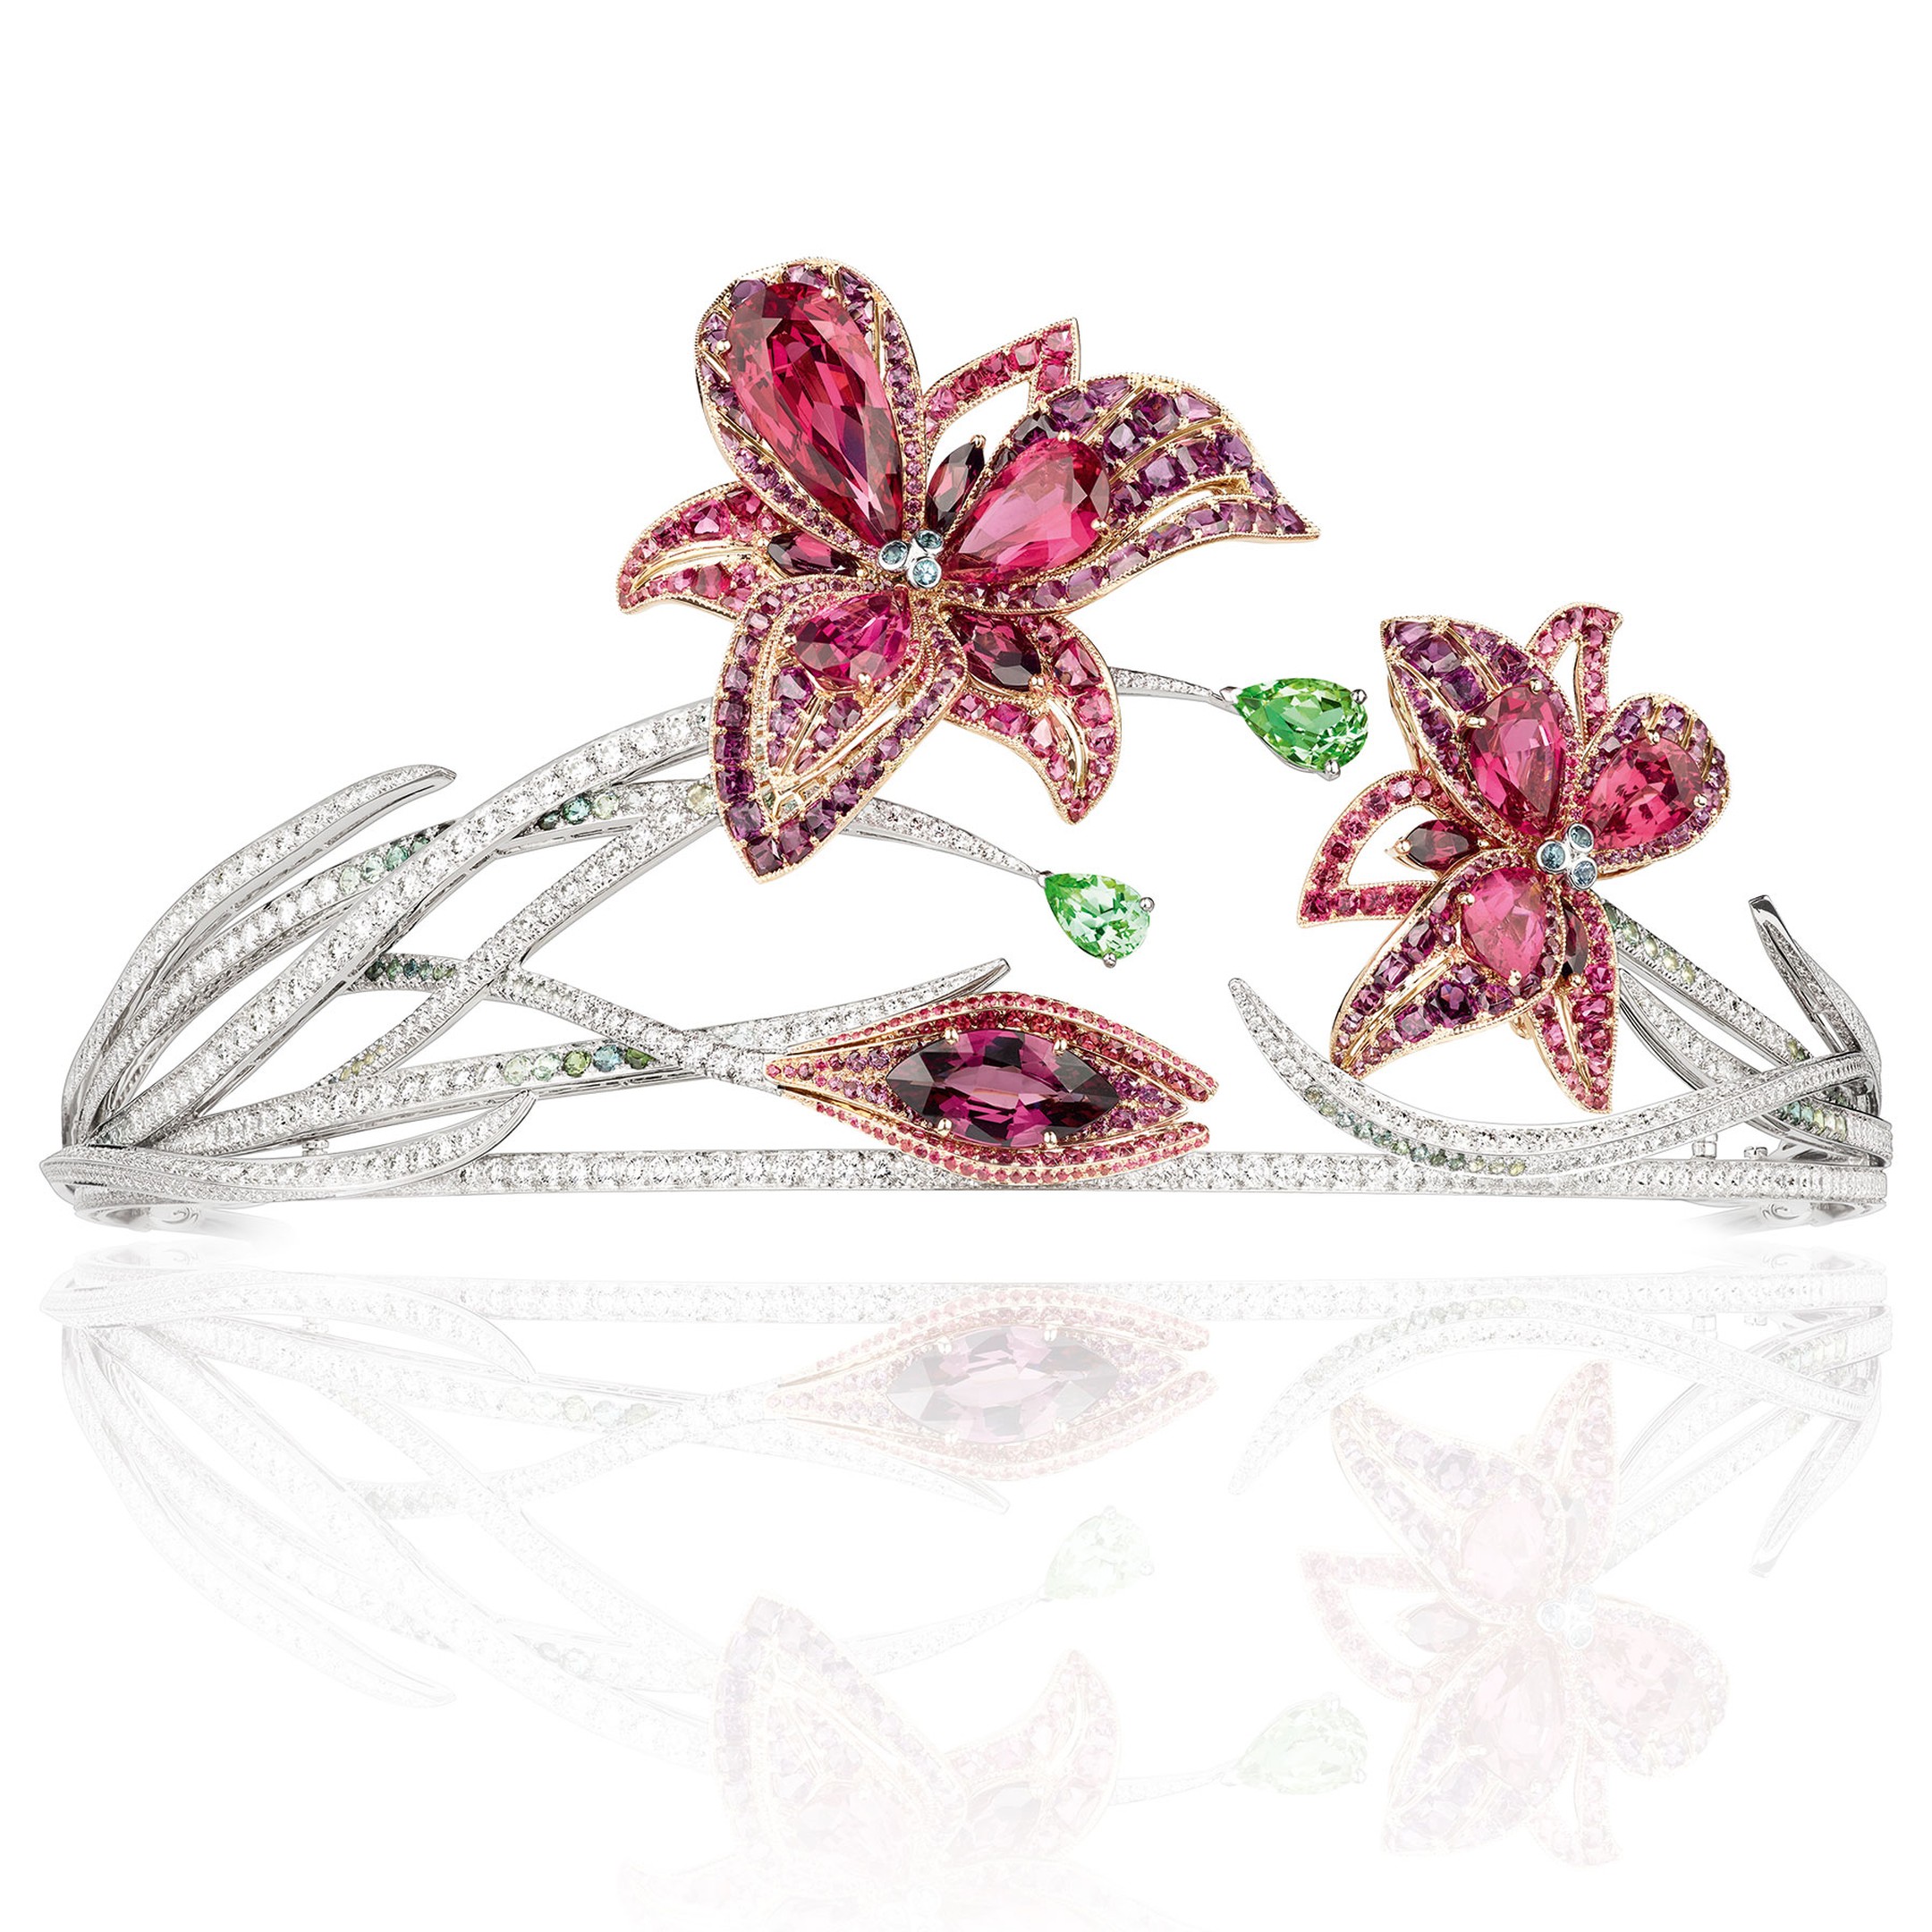 La Nature de Chaumet Passion Incarnat red spinel, garnet, tourmaline and diamond lily tiara, which transforms into a brooch or necklace 